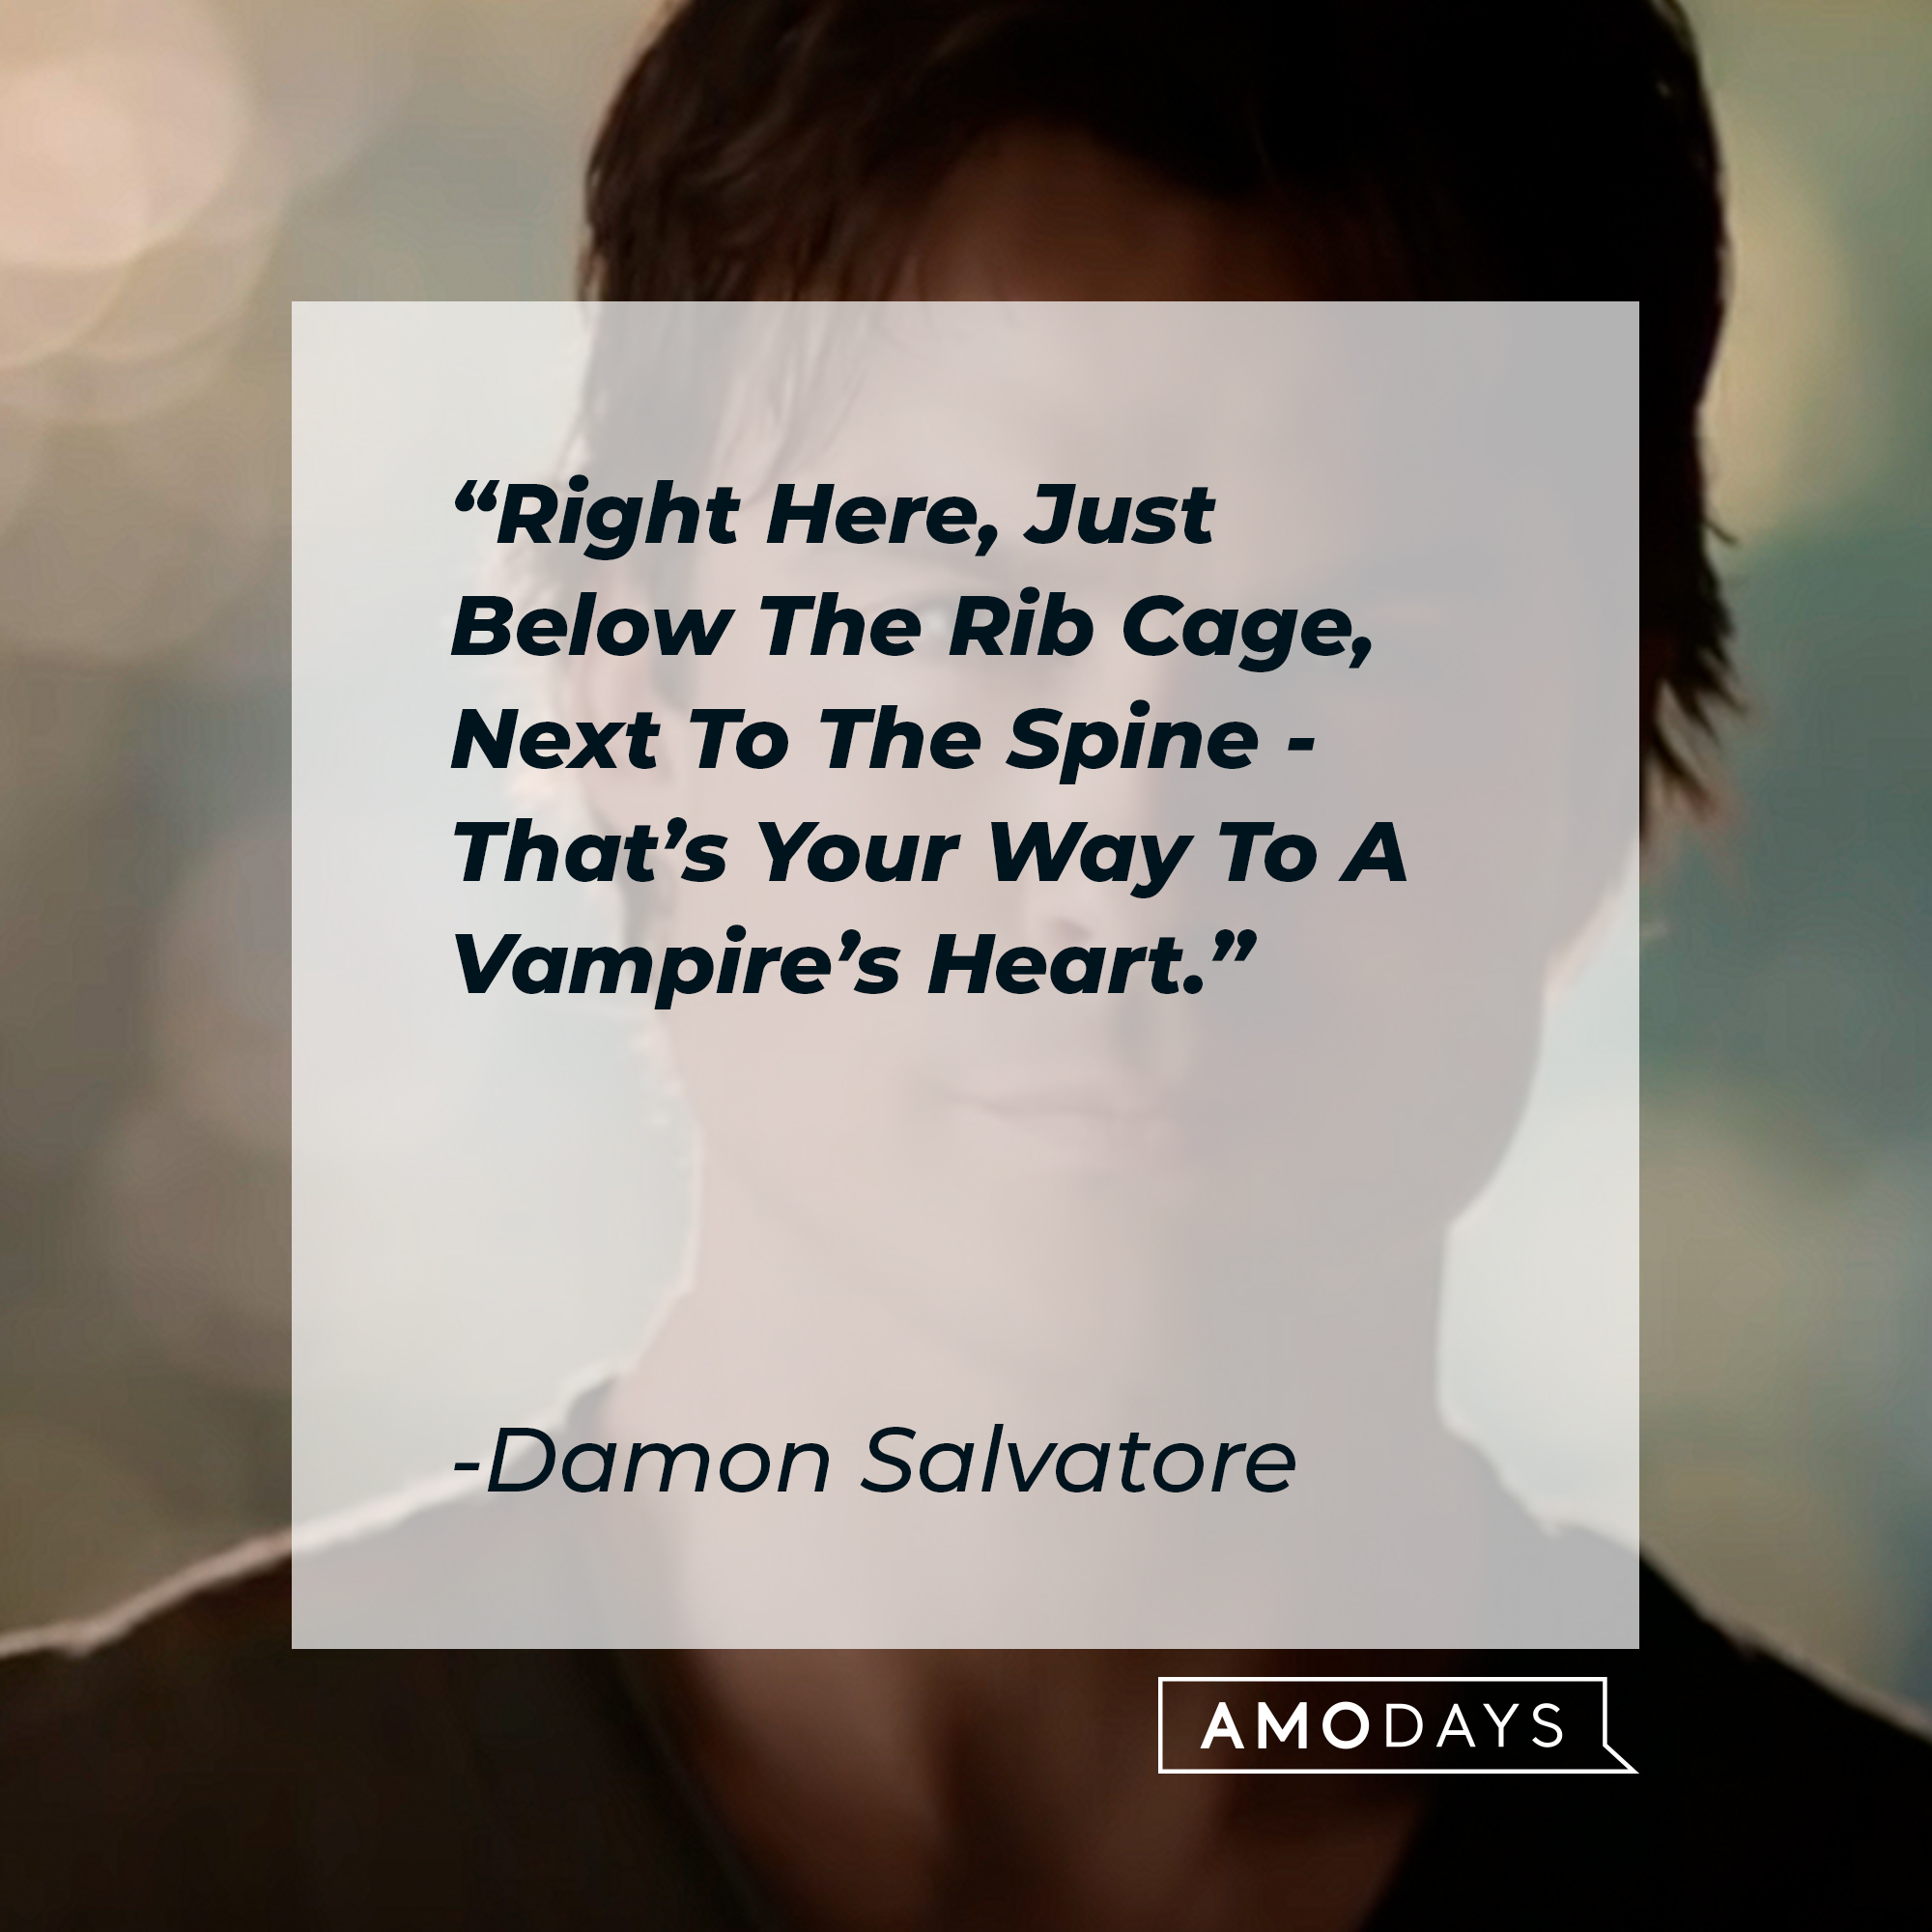 Damon Salvatore's quote: "Right Here, Just Below The Rib Cage, Next To The Spine, That's Your Way To A Vampire's Heart" | Source: youtube.com/stillwatchingnetflix